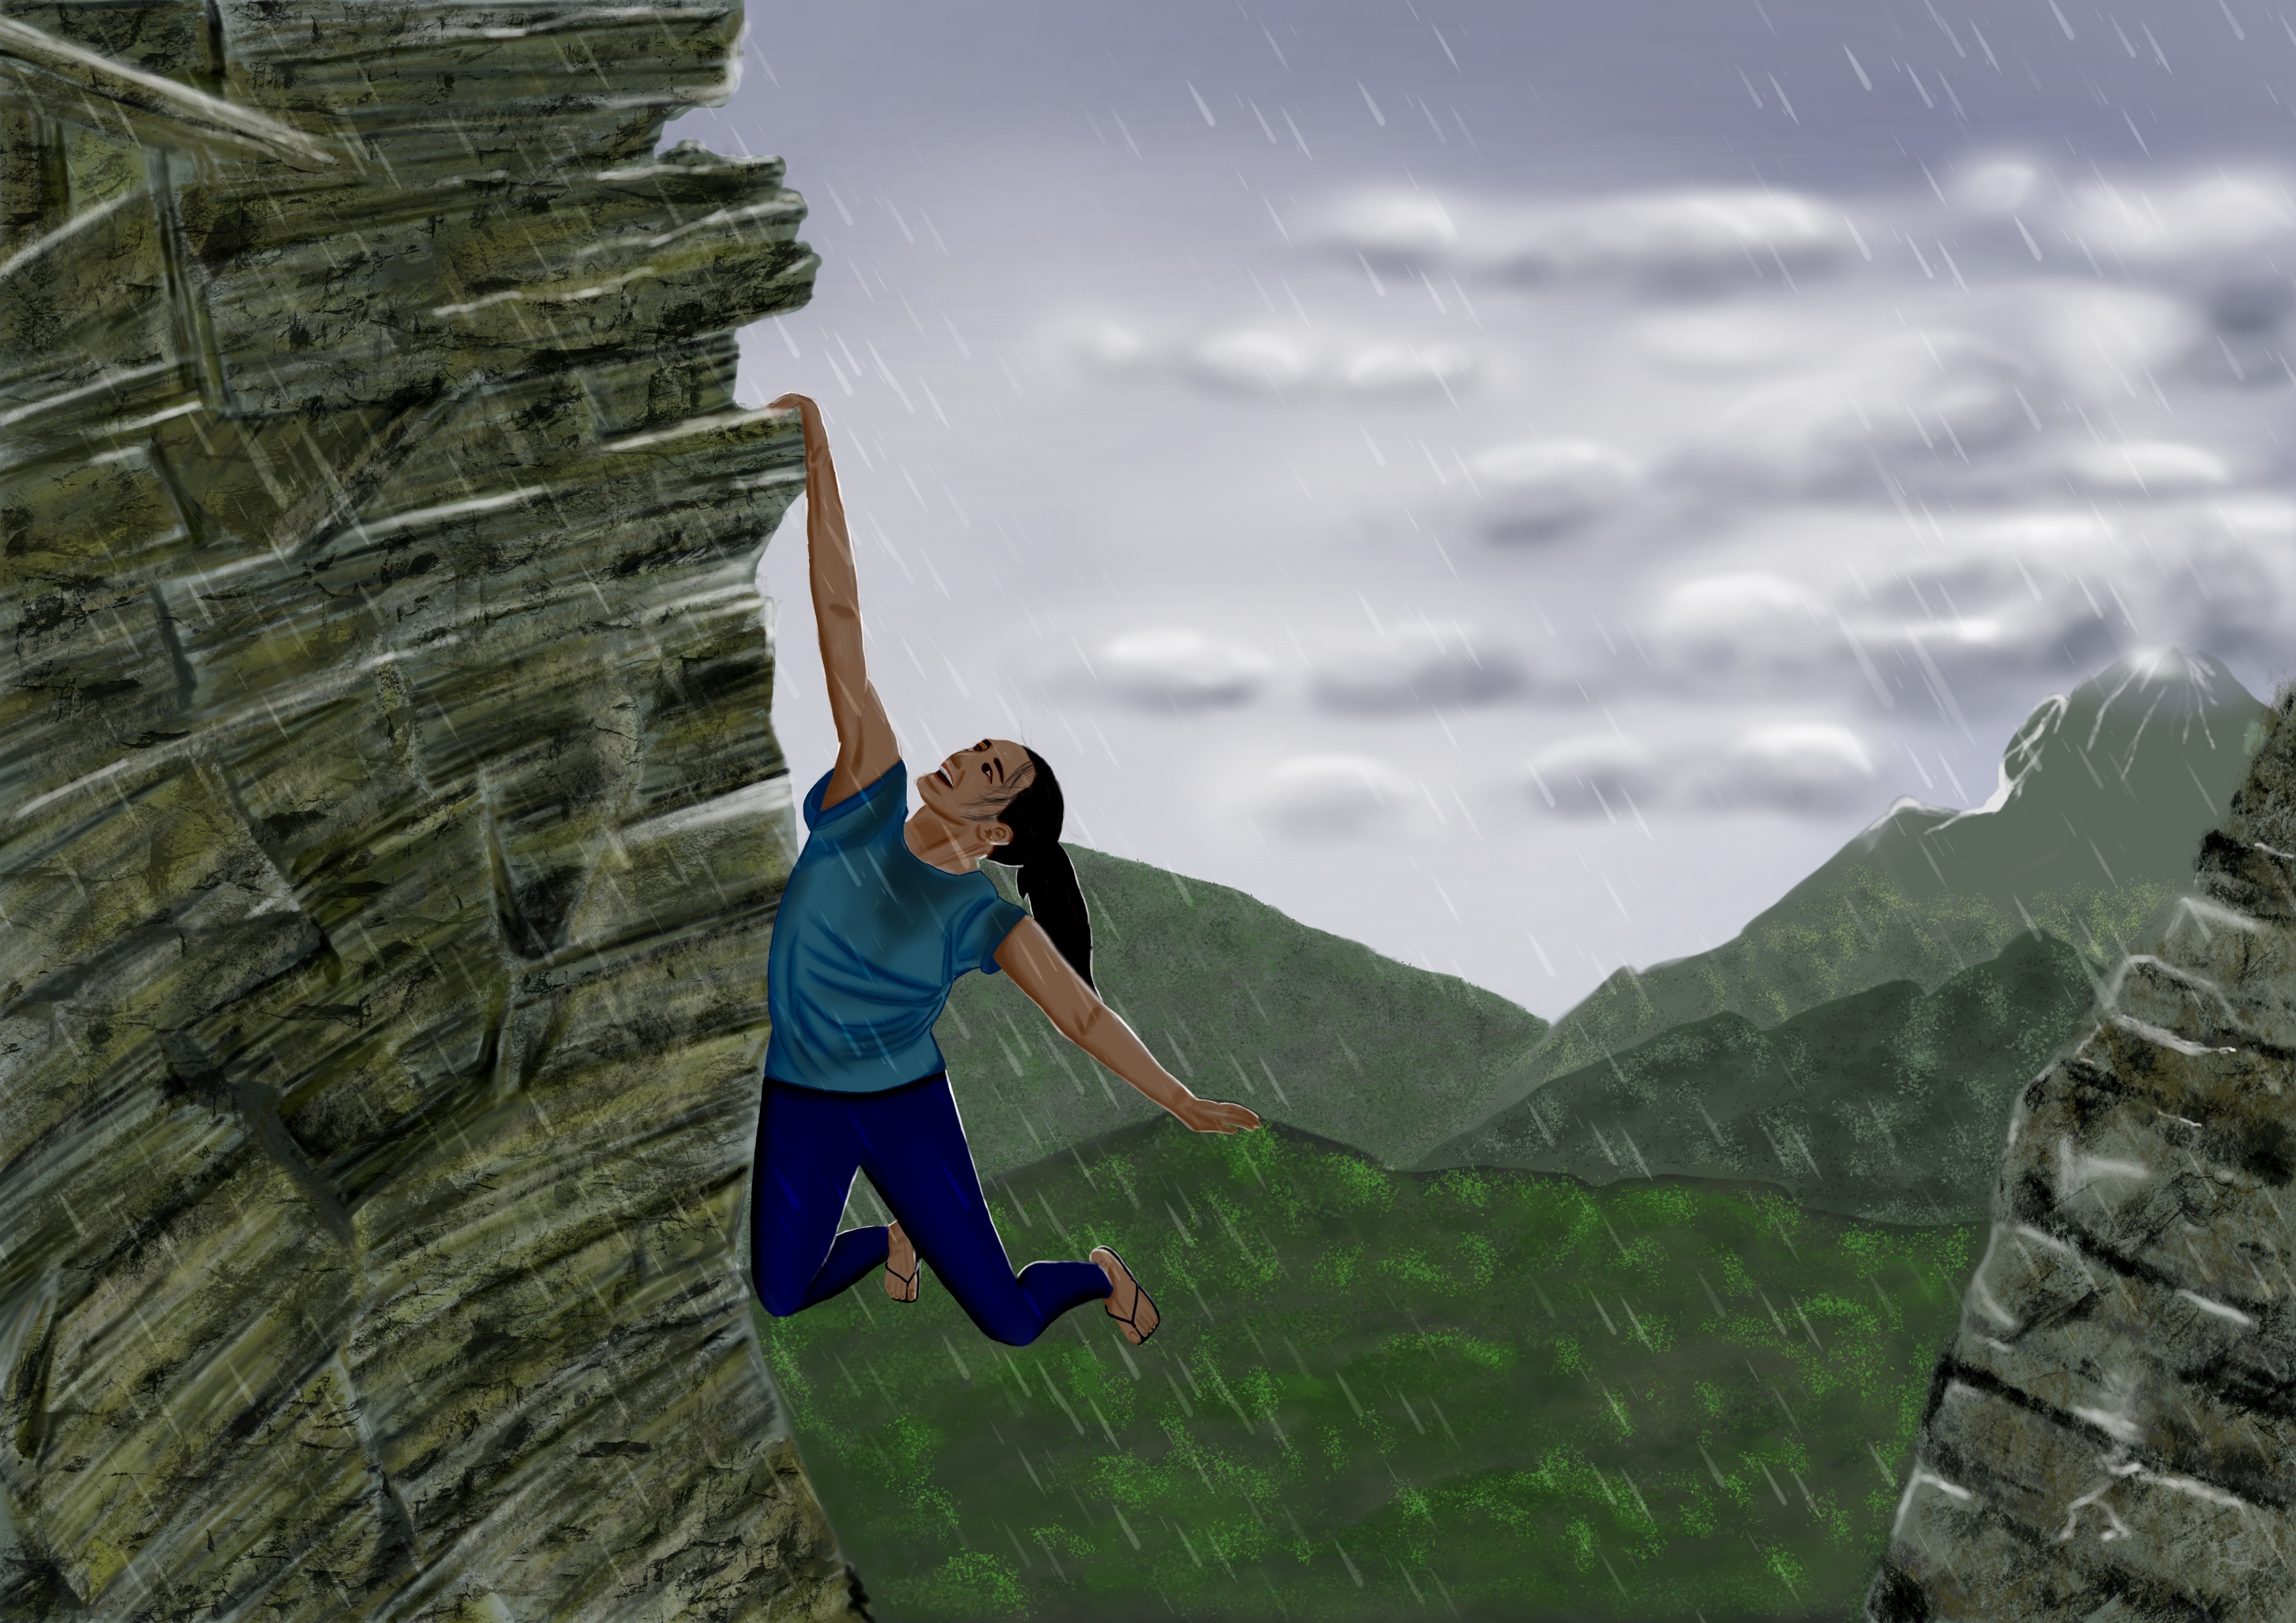 Girl hanging from cliff face with one hand